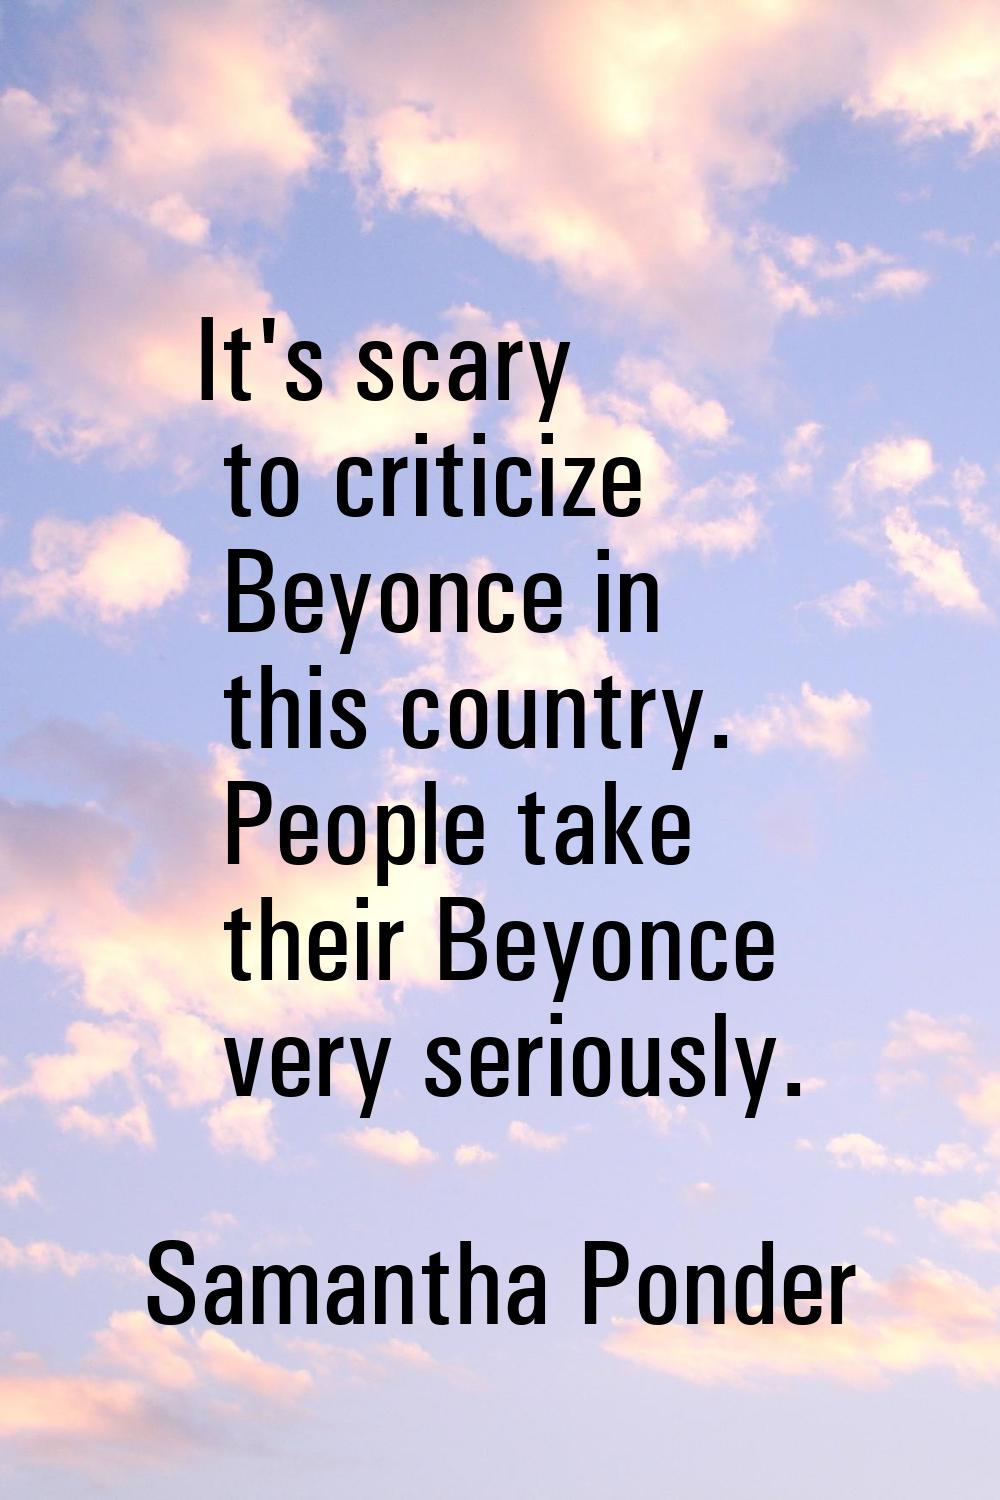 It's scary to criticize Beyonce in this country. People take their Beyonce very seriously.